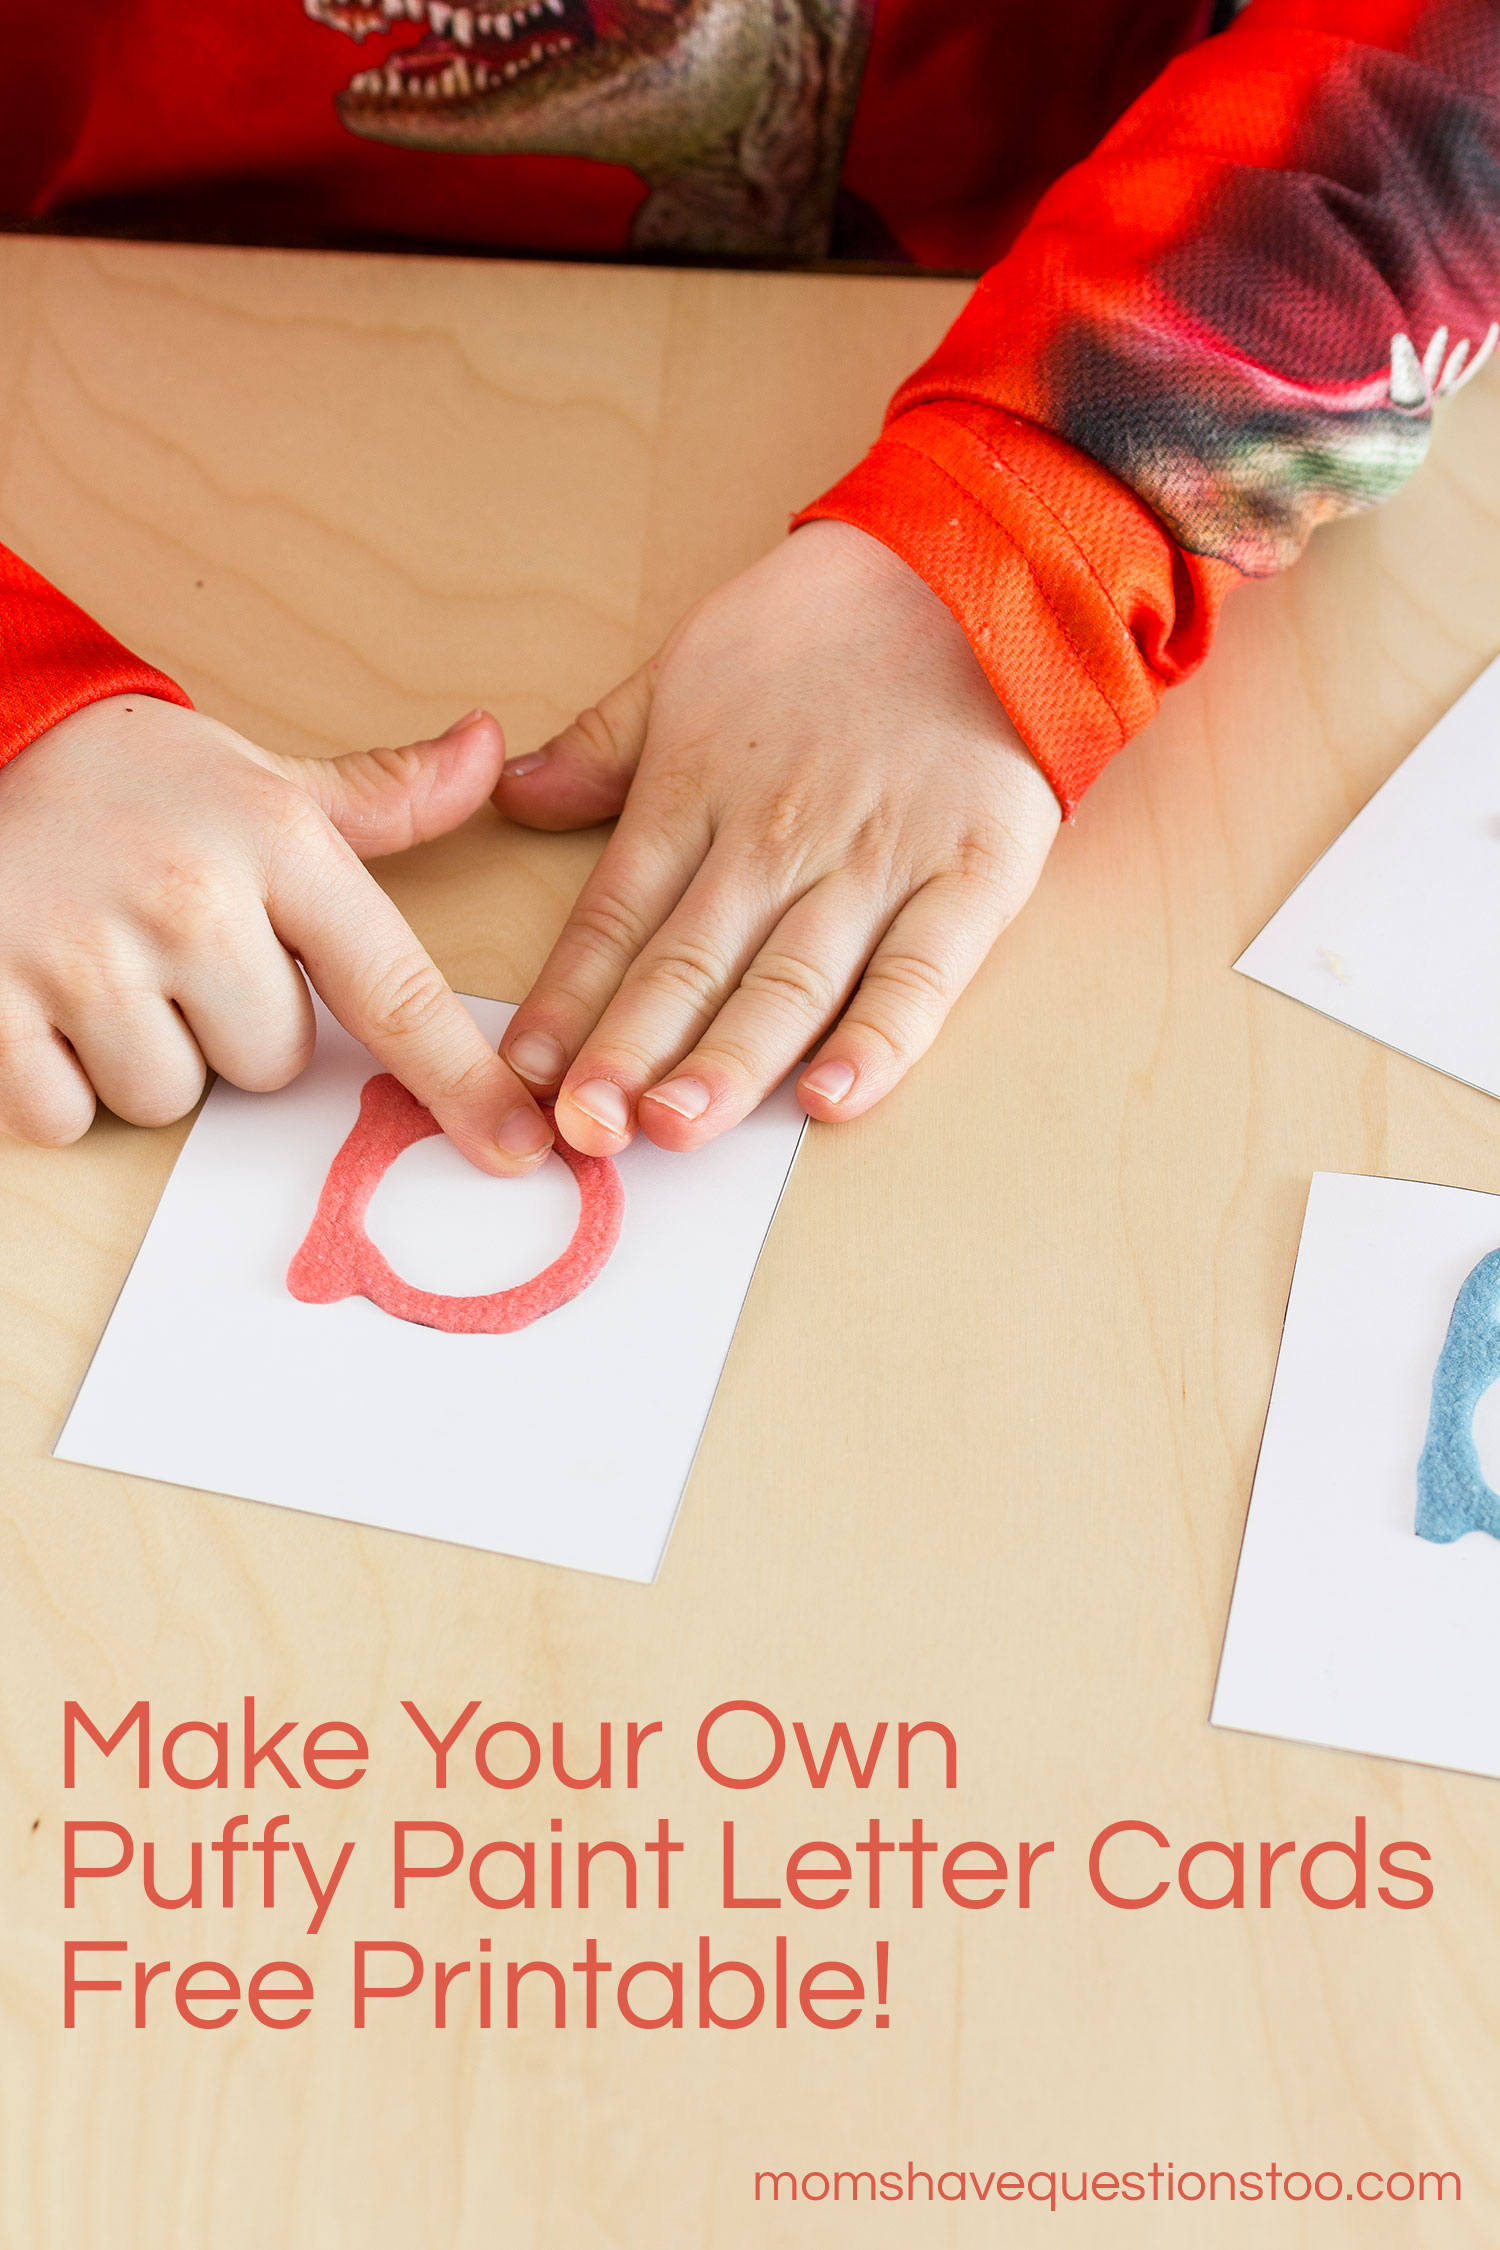 Puffy Paint Letter Cards, Replace Montessori Sandpaper Letters -- Moms Have Questions Too